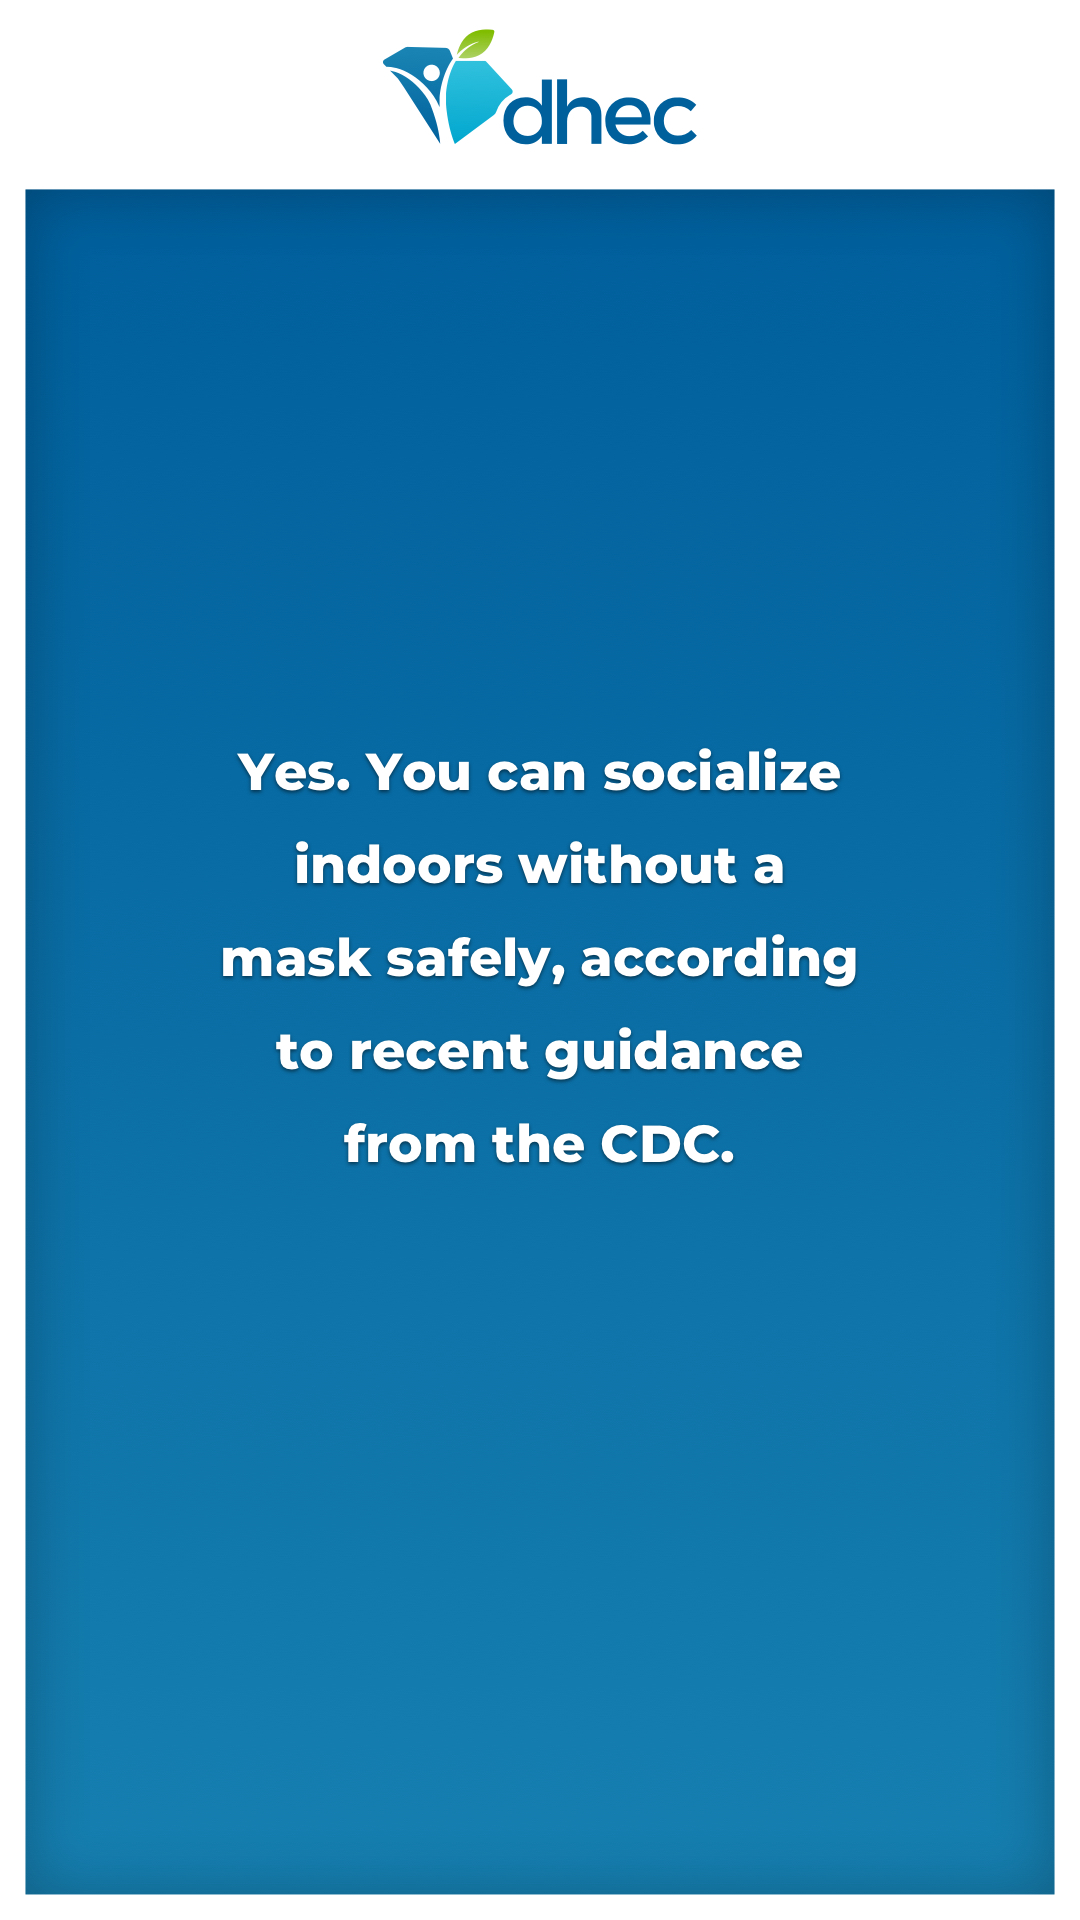 Yes. You can socialize indoors without a mask safely, according to recent guidance from the CDC.